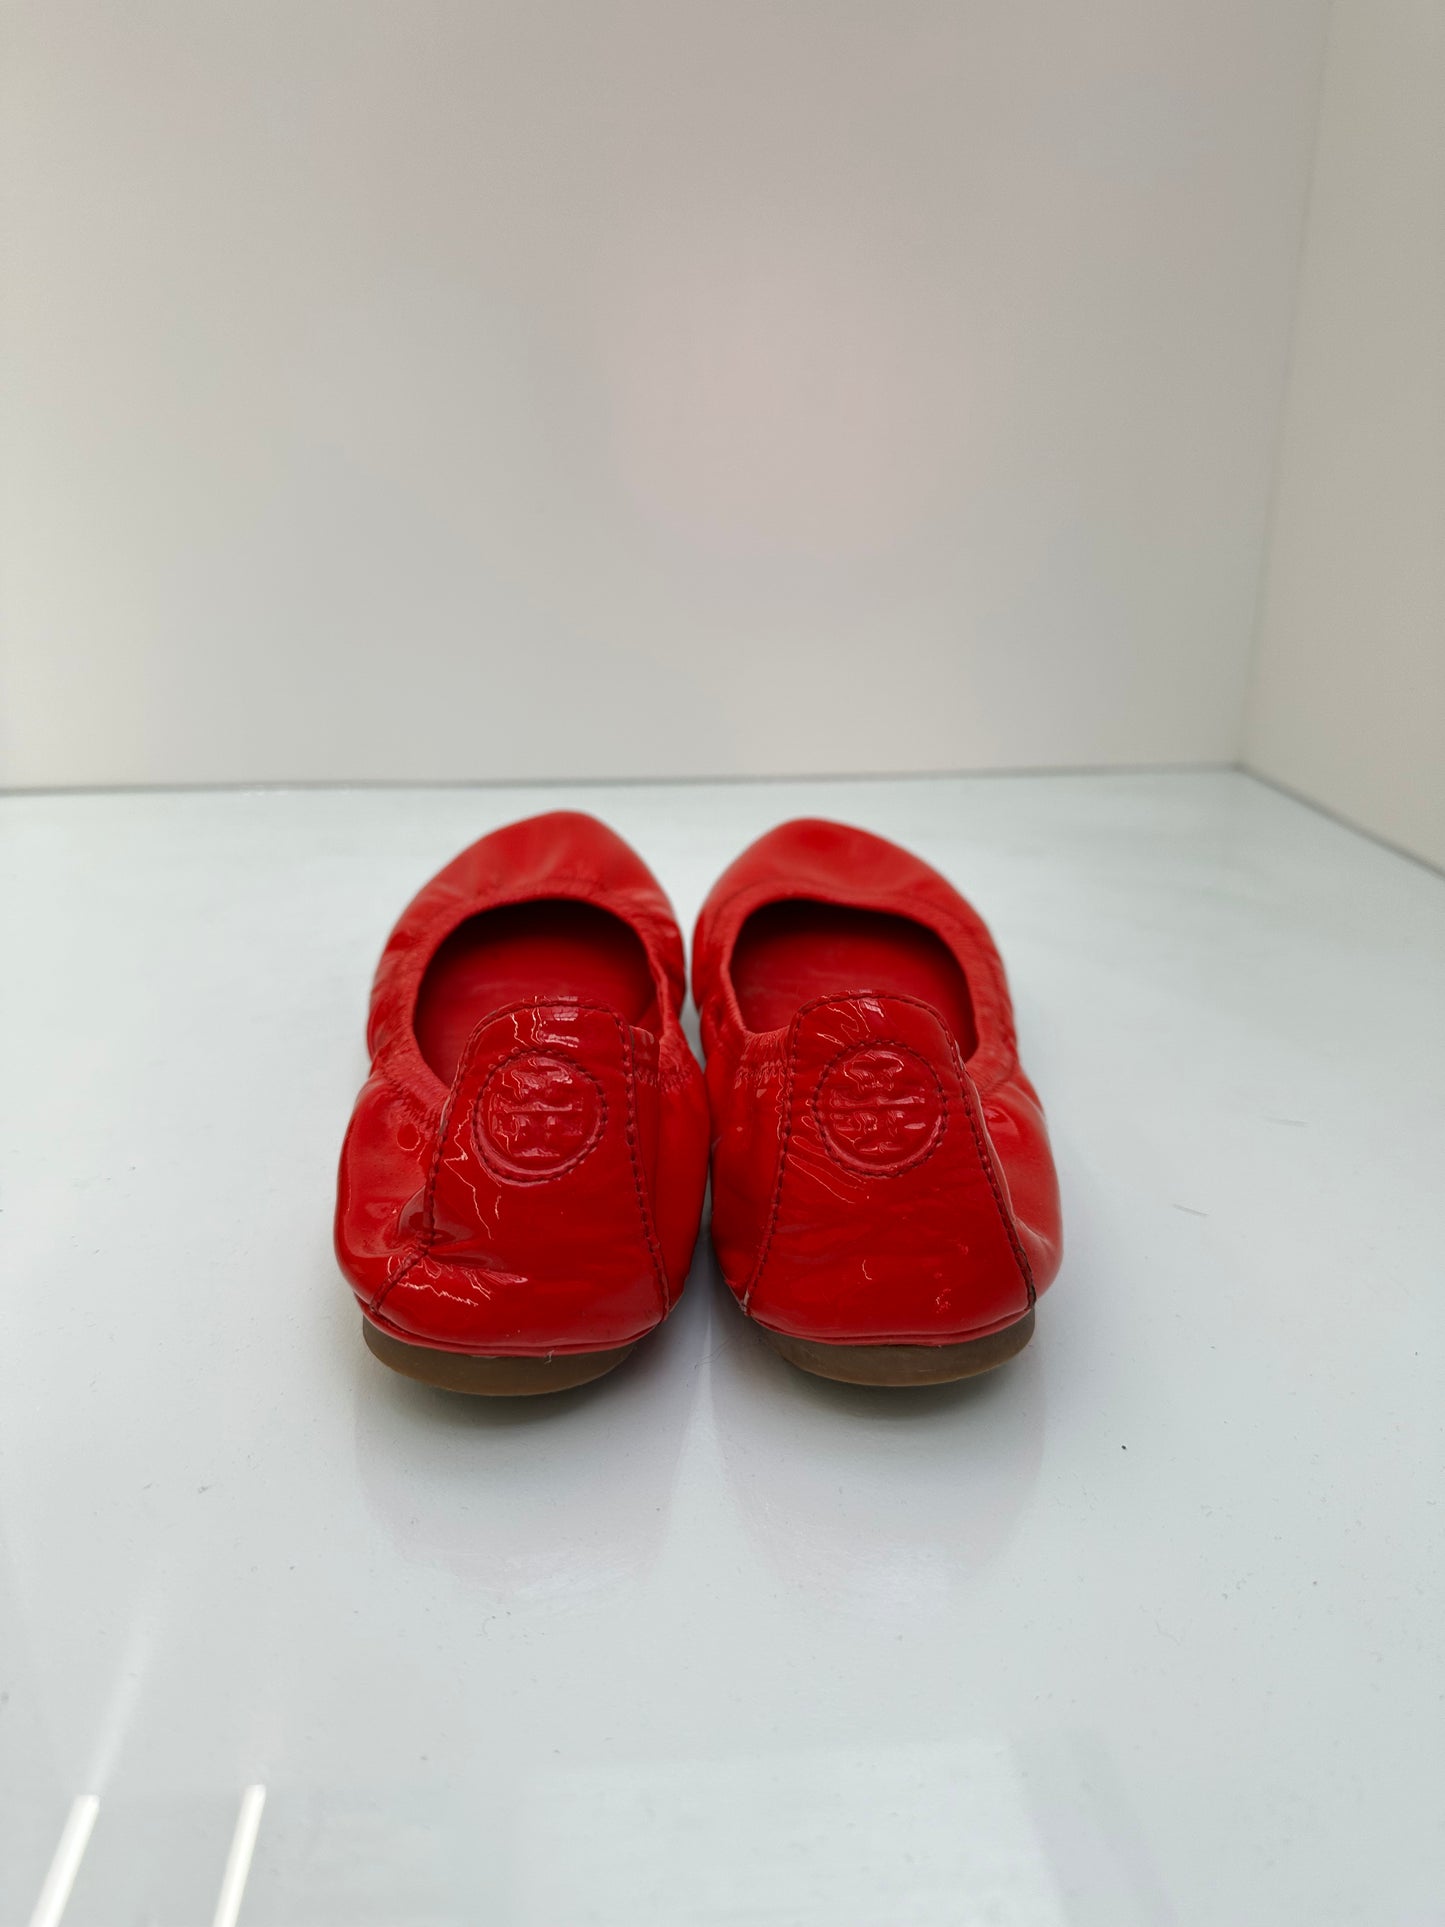 Tory Burch Red Patent Flats